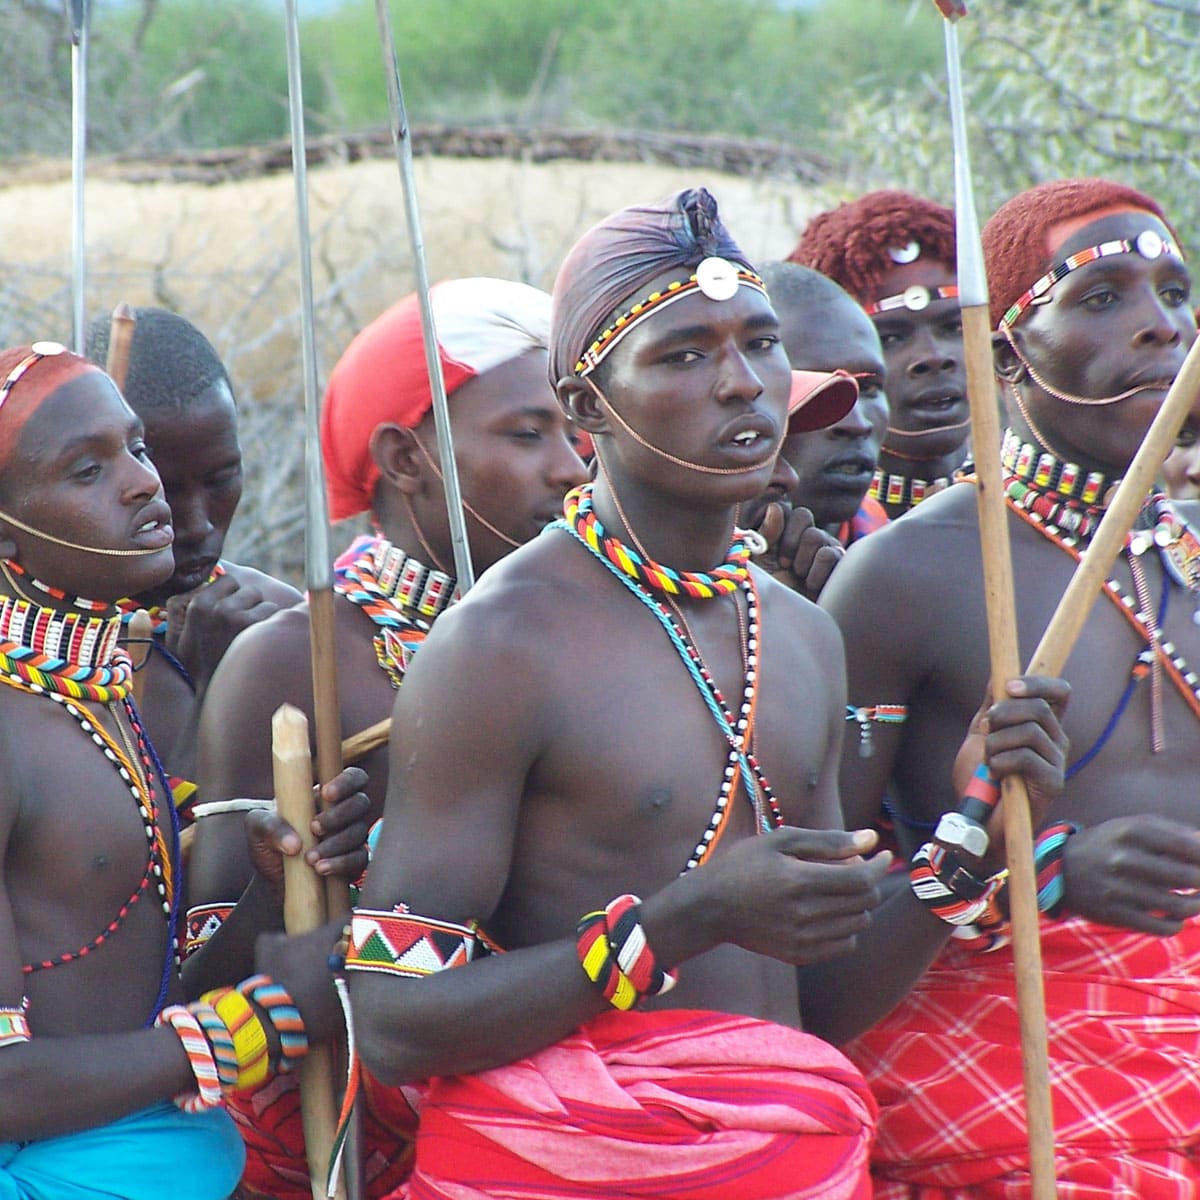 Male Samburu tribesmen in tradition red and blue clothing with woven accessories